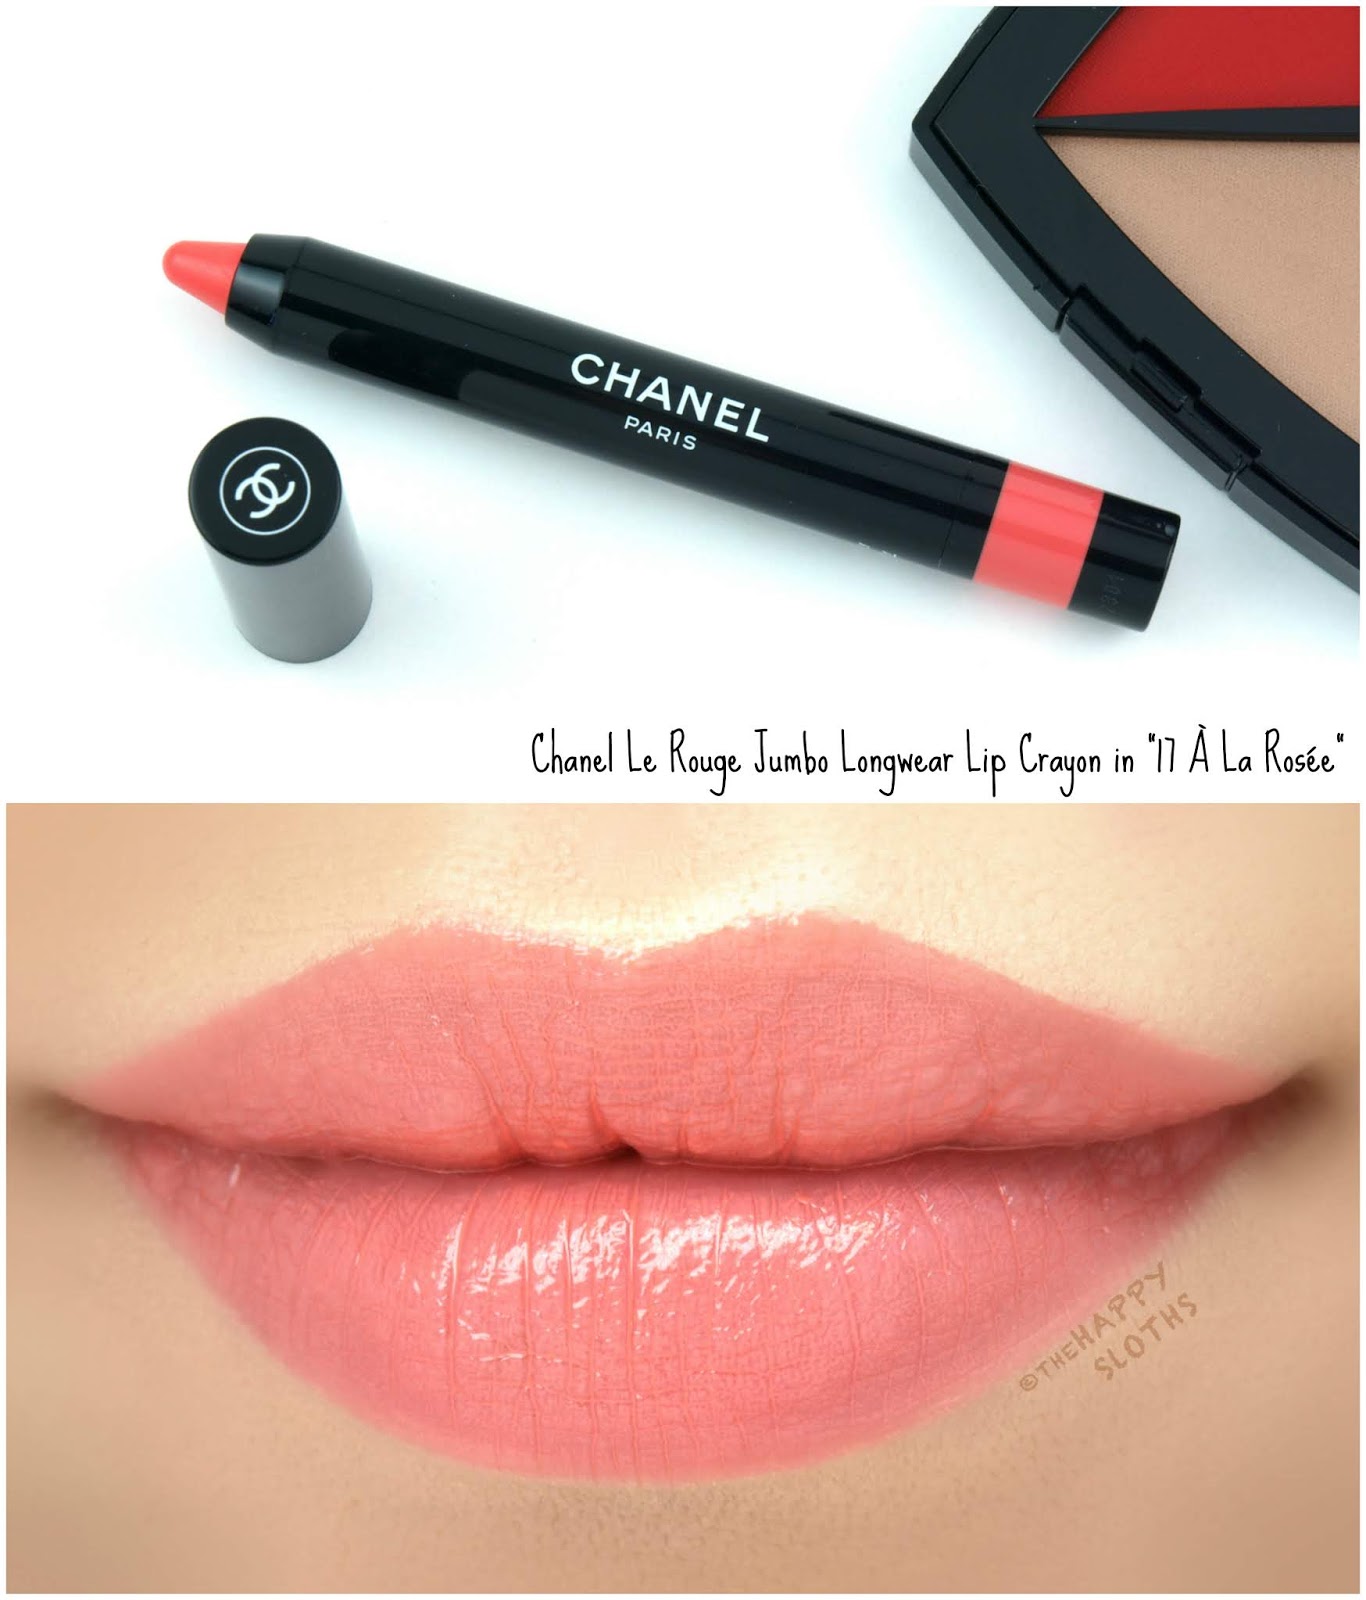 Chanel Cruise 2018 | Le Rouge Jumbo Longwear Lip Crayon in "17 A La Rosee": Review and Swatches